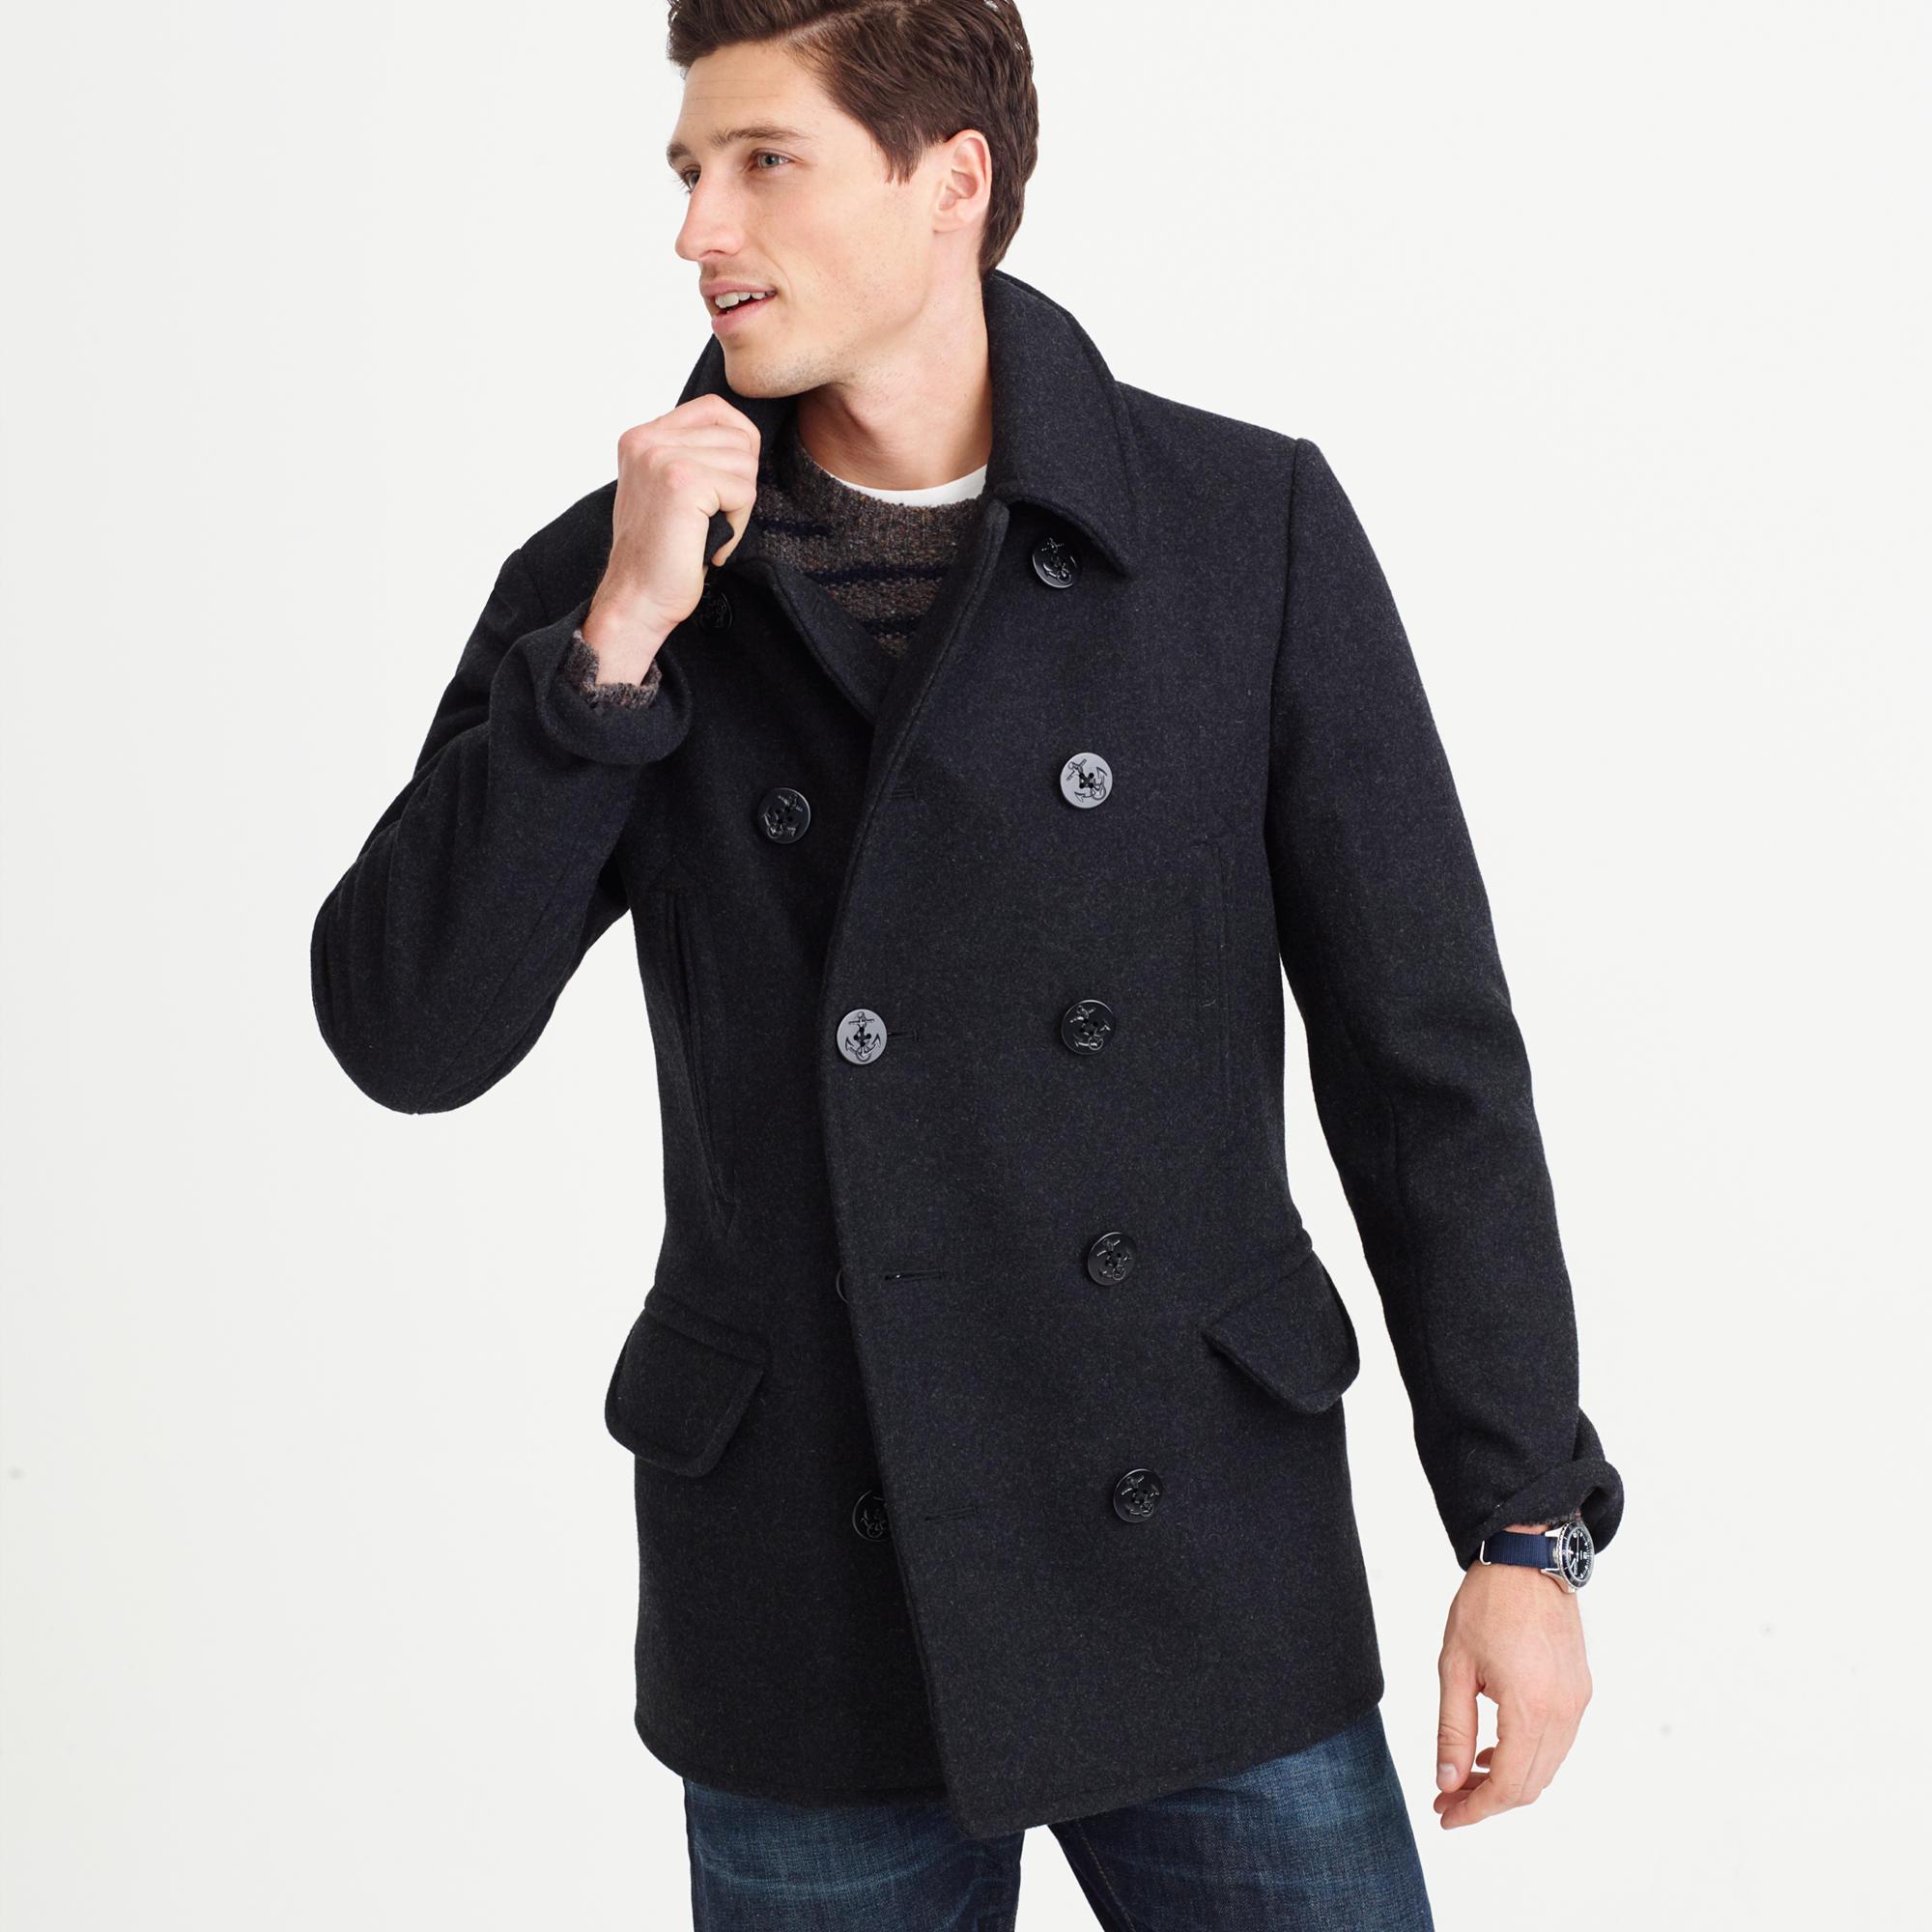 Lyst - J.Crew Dock Peacoat With Thinsulate in Gray for Men